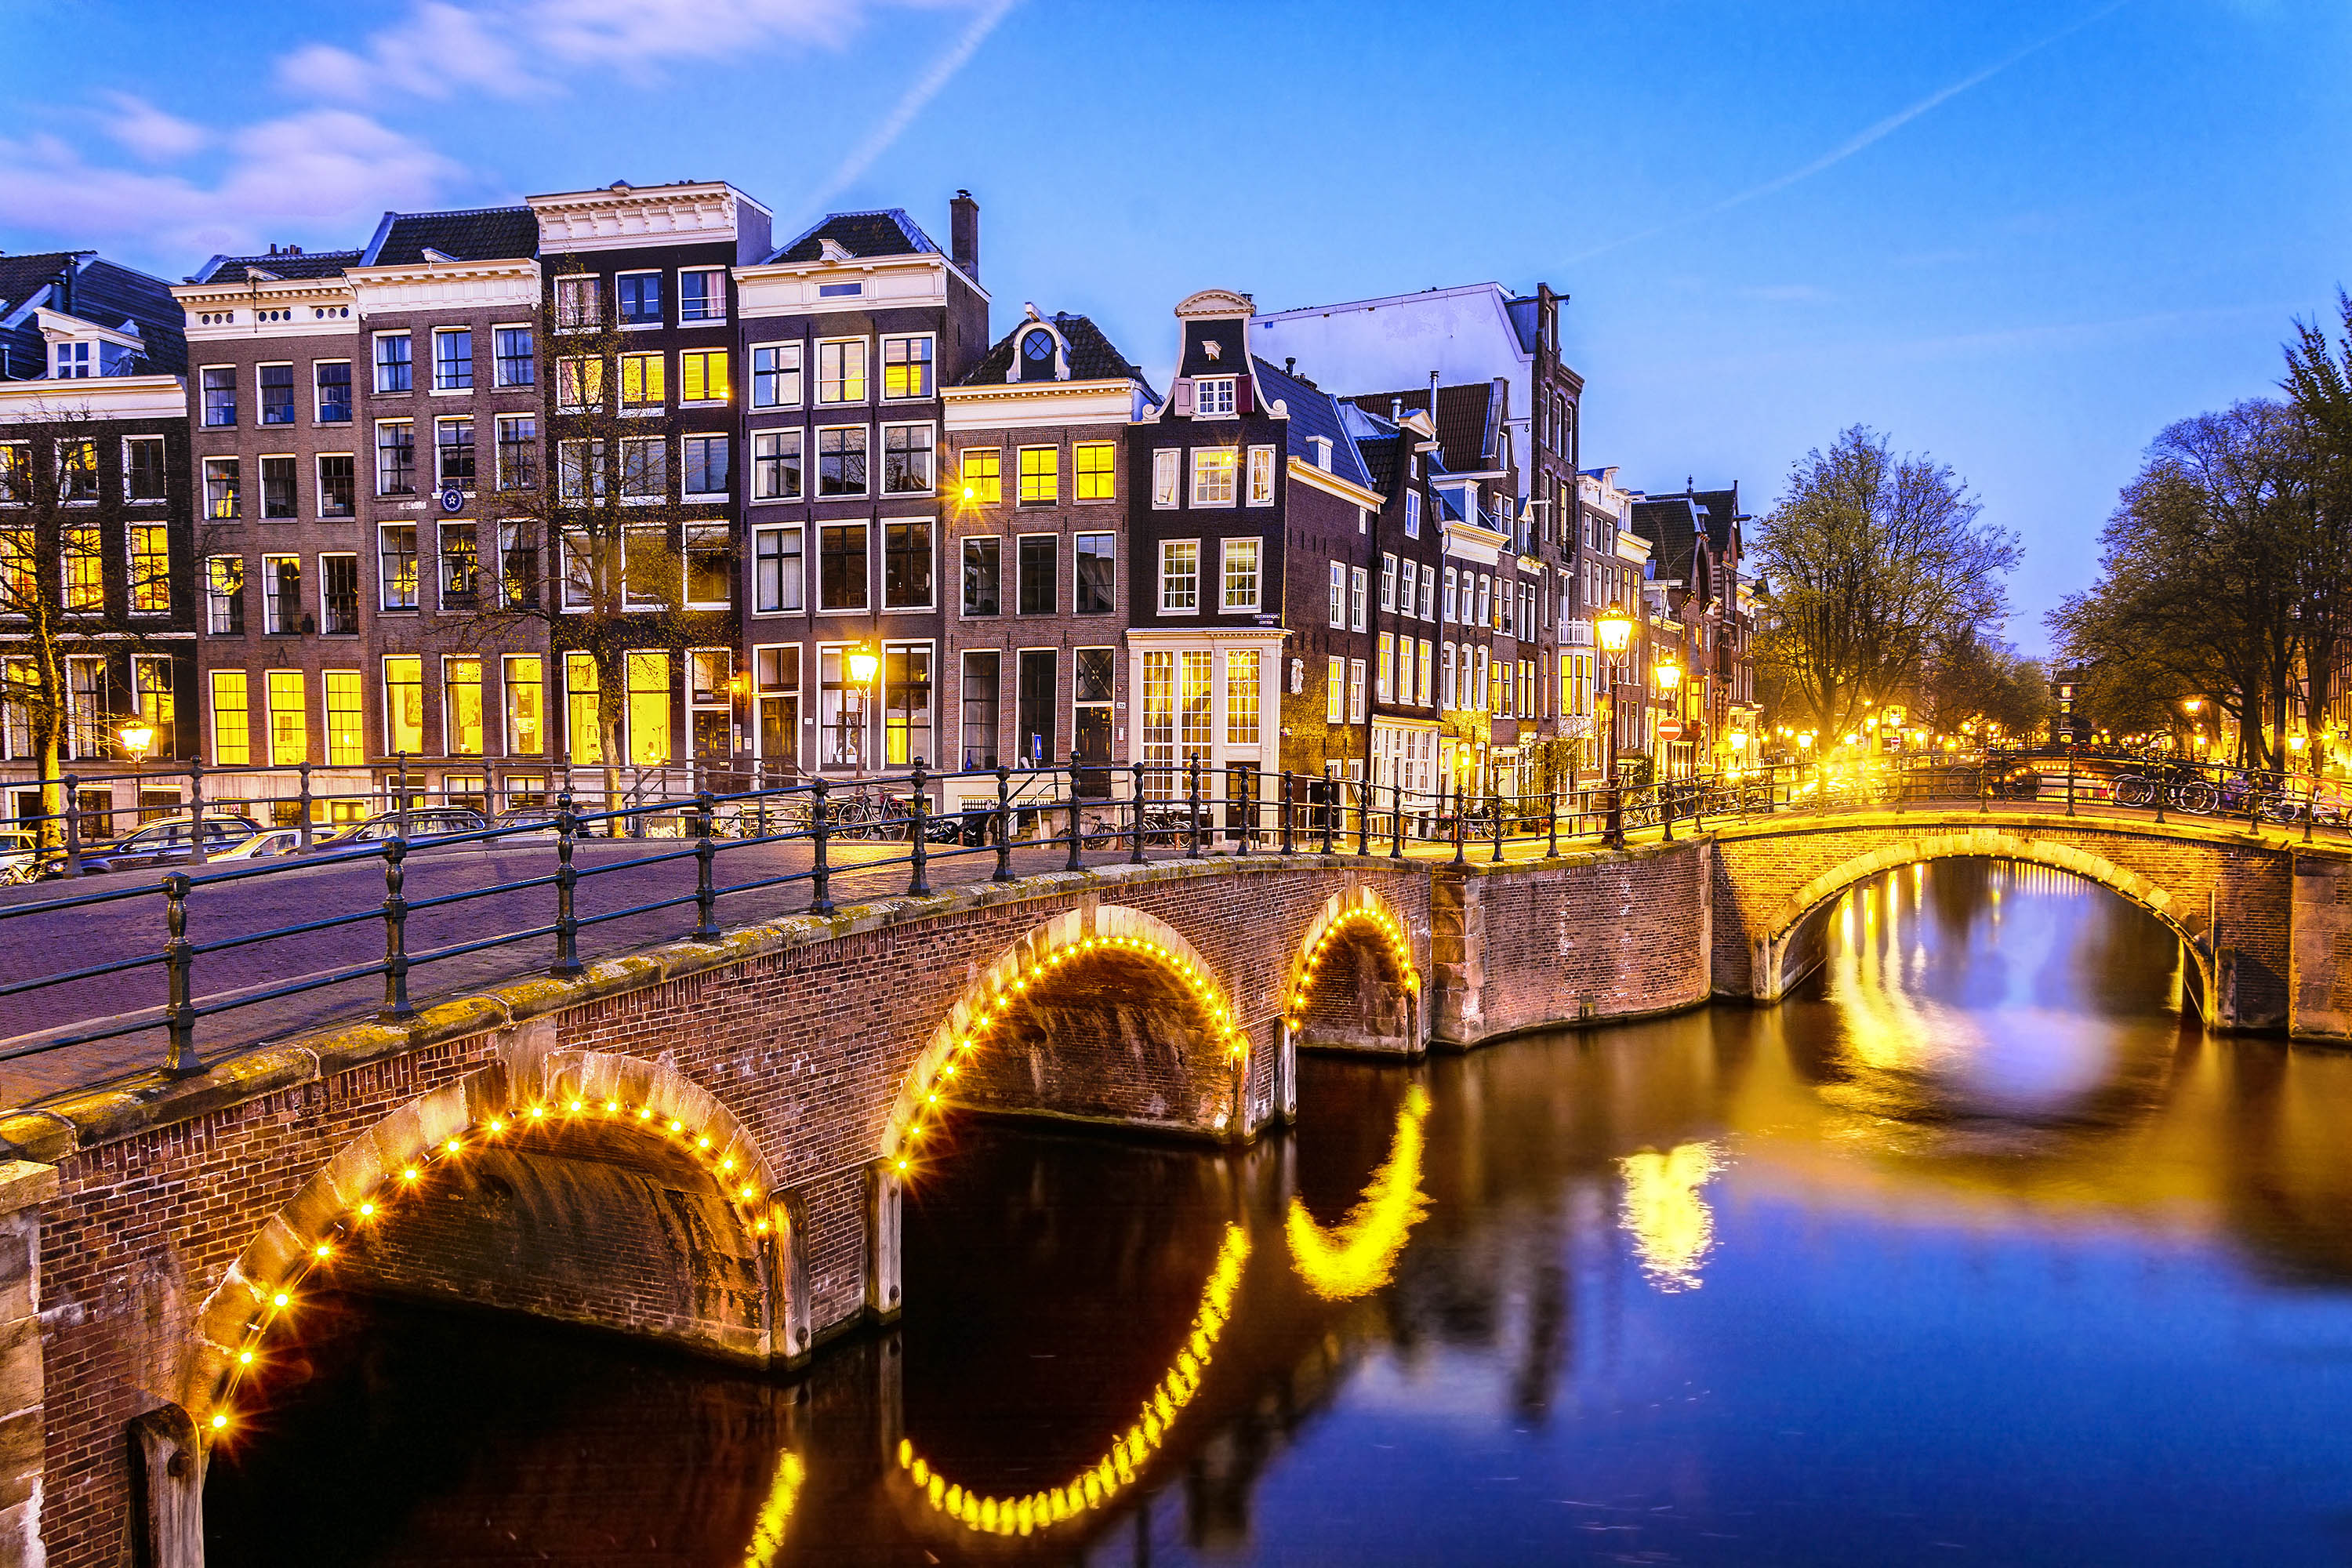 Mini Amsterdam Cruise: 2 Nights incl. Cruise & Breakfast only £40 pp